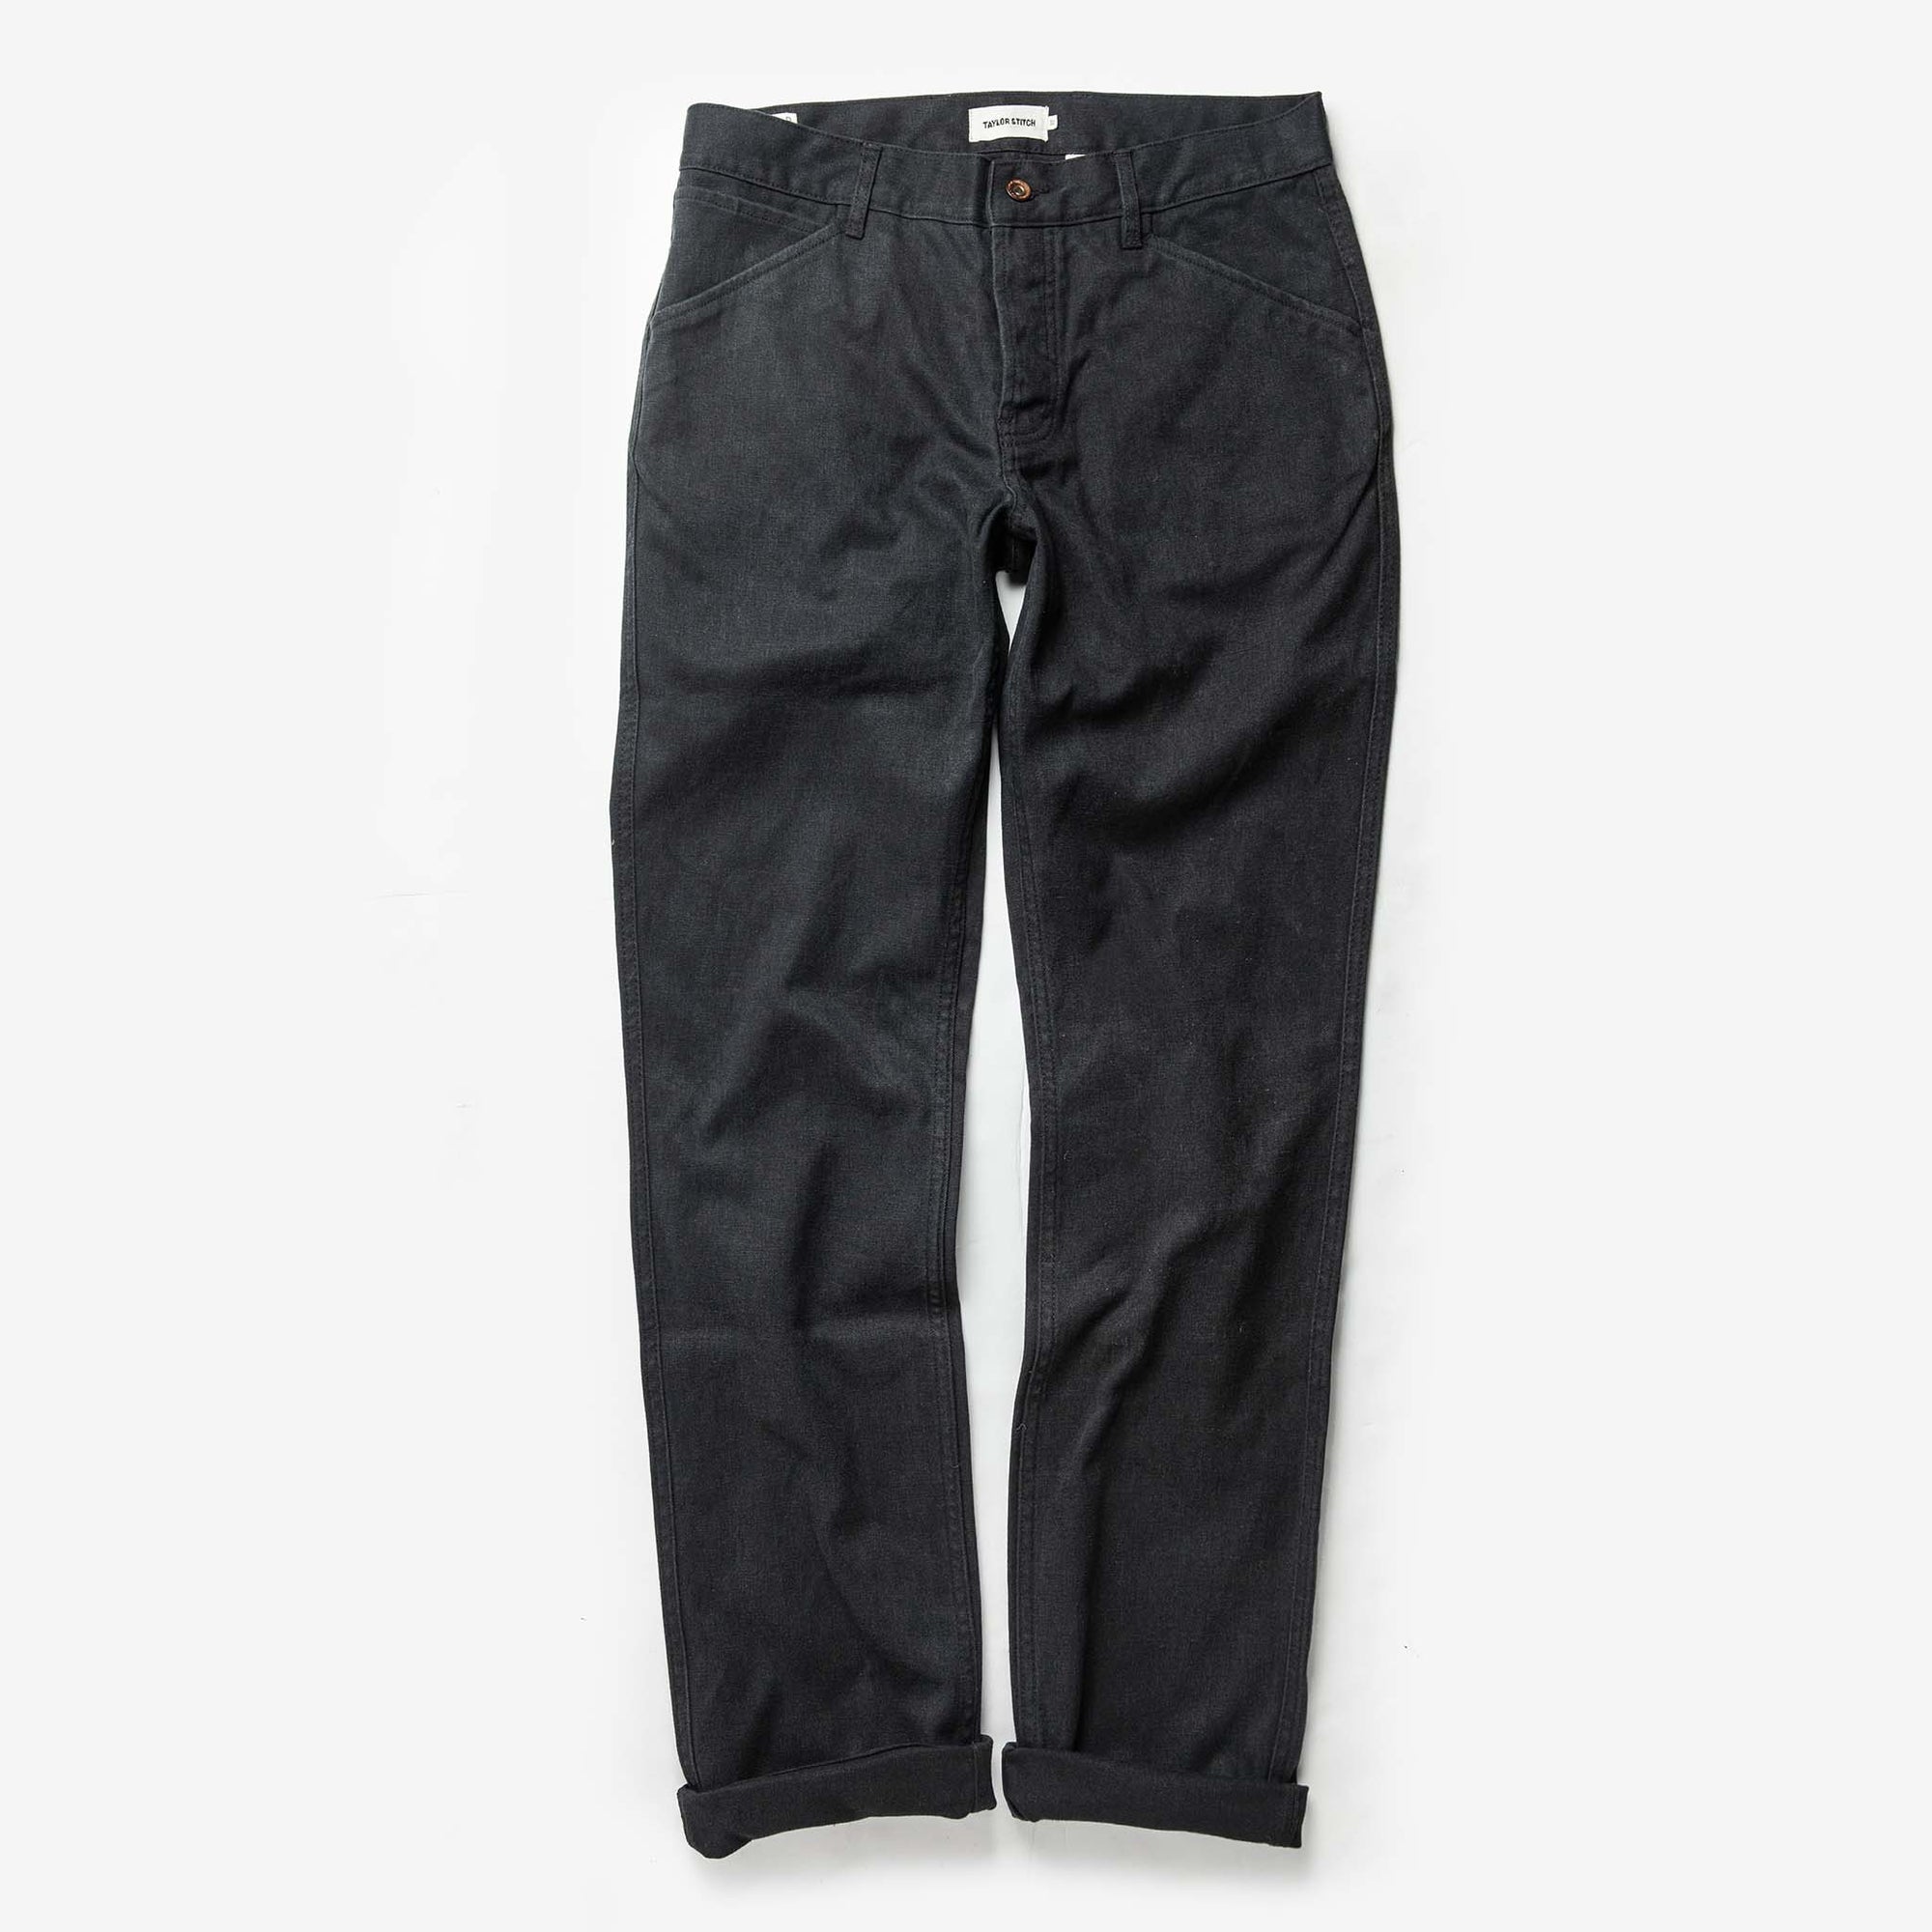 Taylor Stitch Camp Pant in Coal Boss Duck